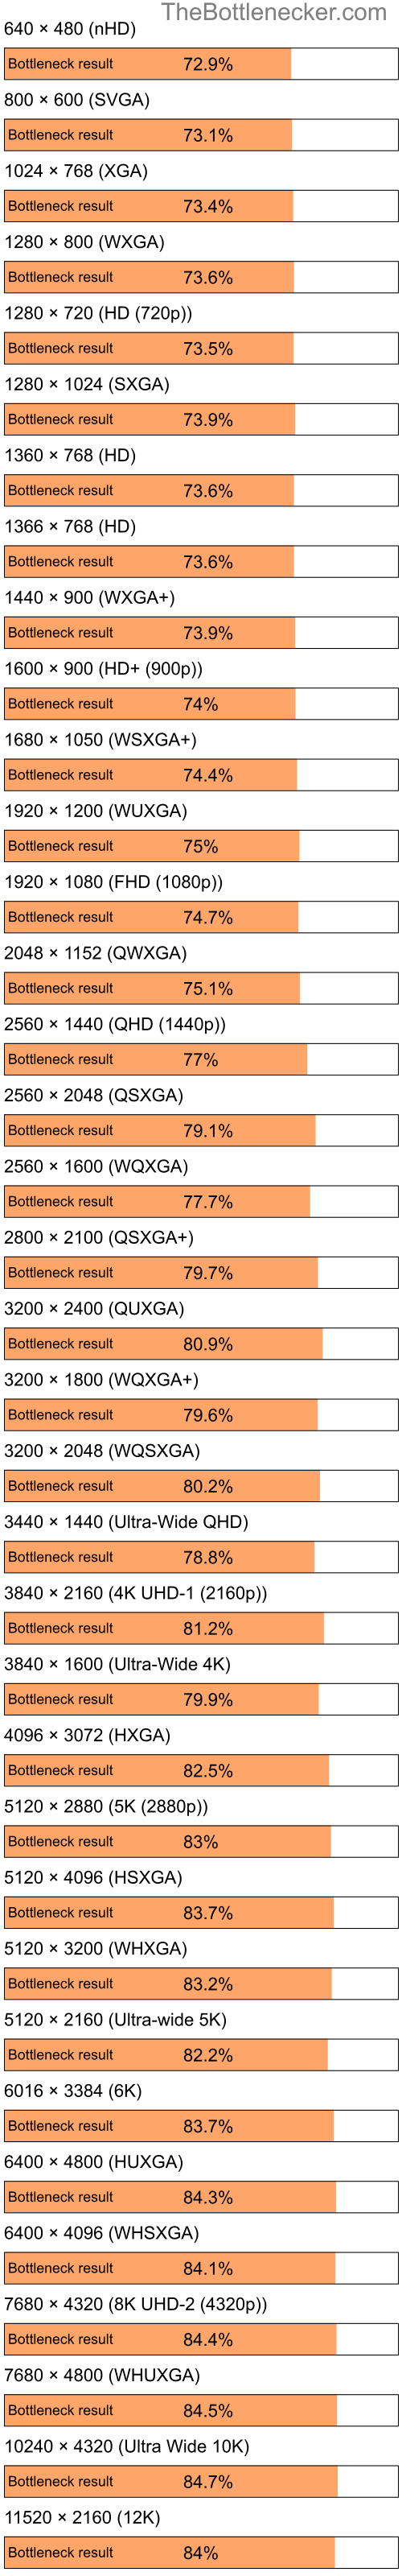 Bottleneck results by resolution for Intel Pentium 4 and AMD Mobility Radeon X1400 in General Tasks